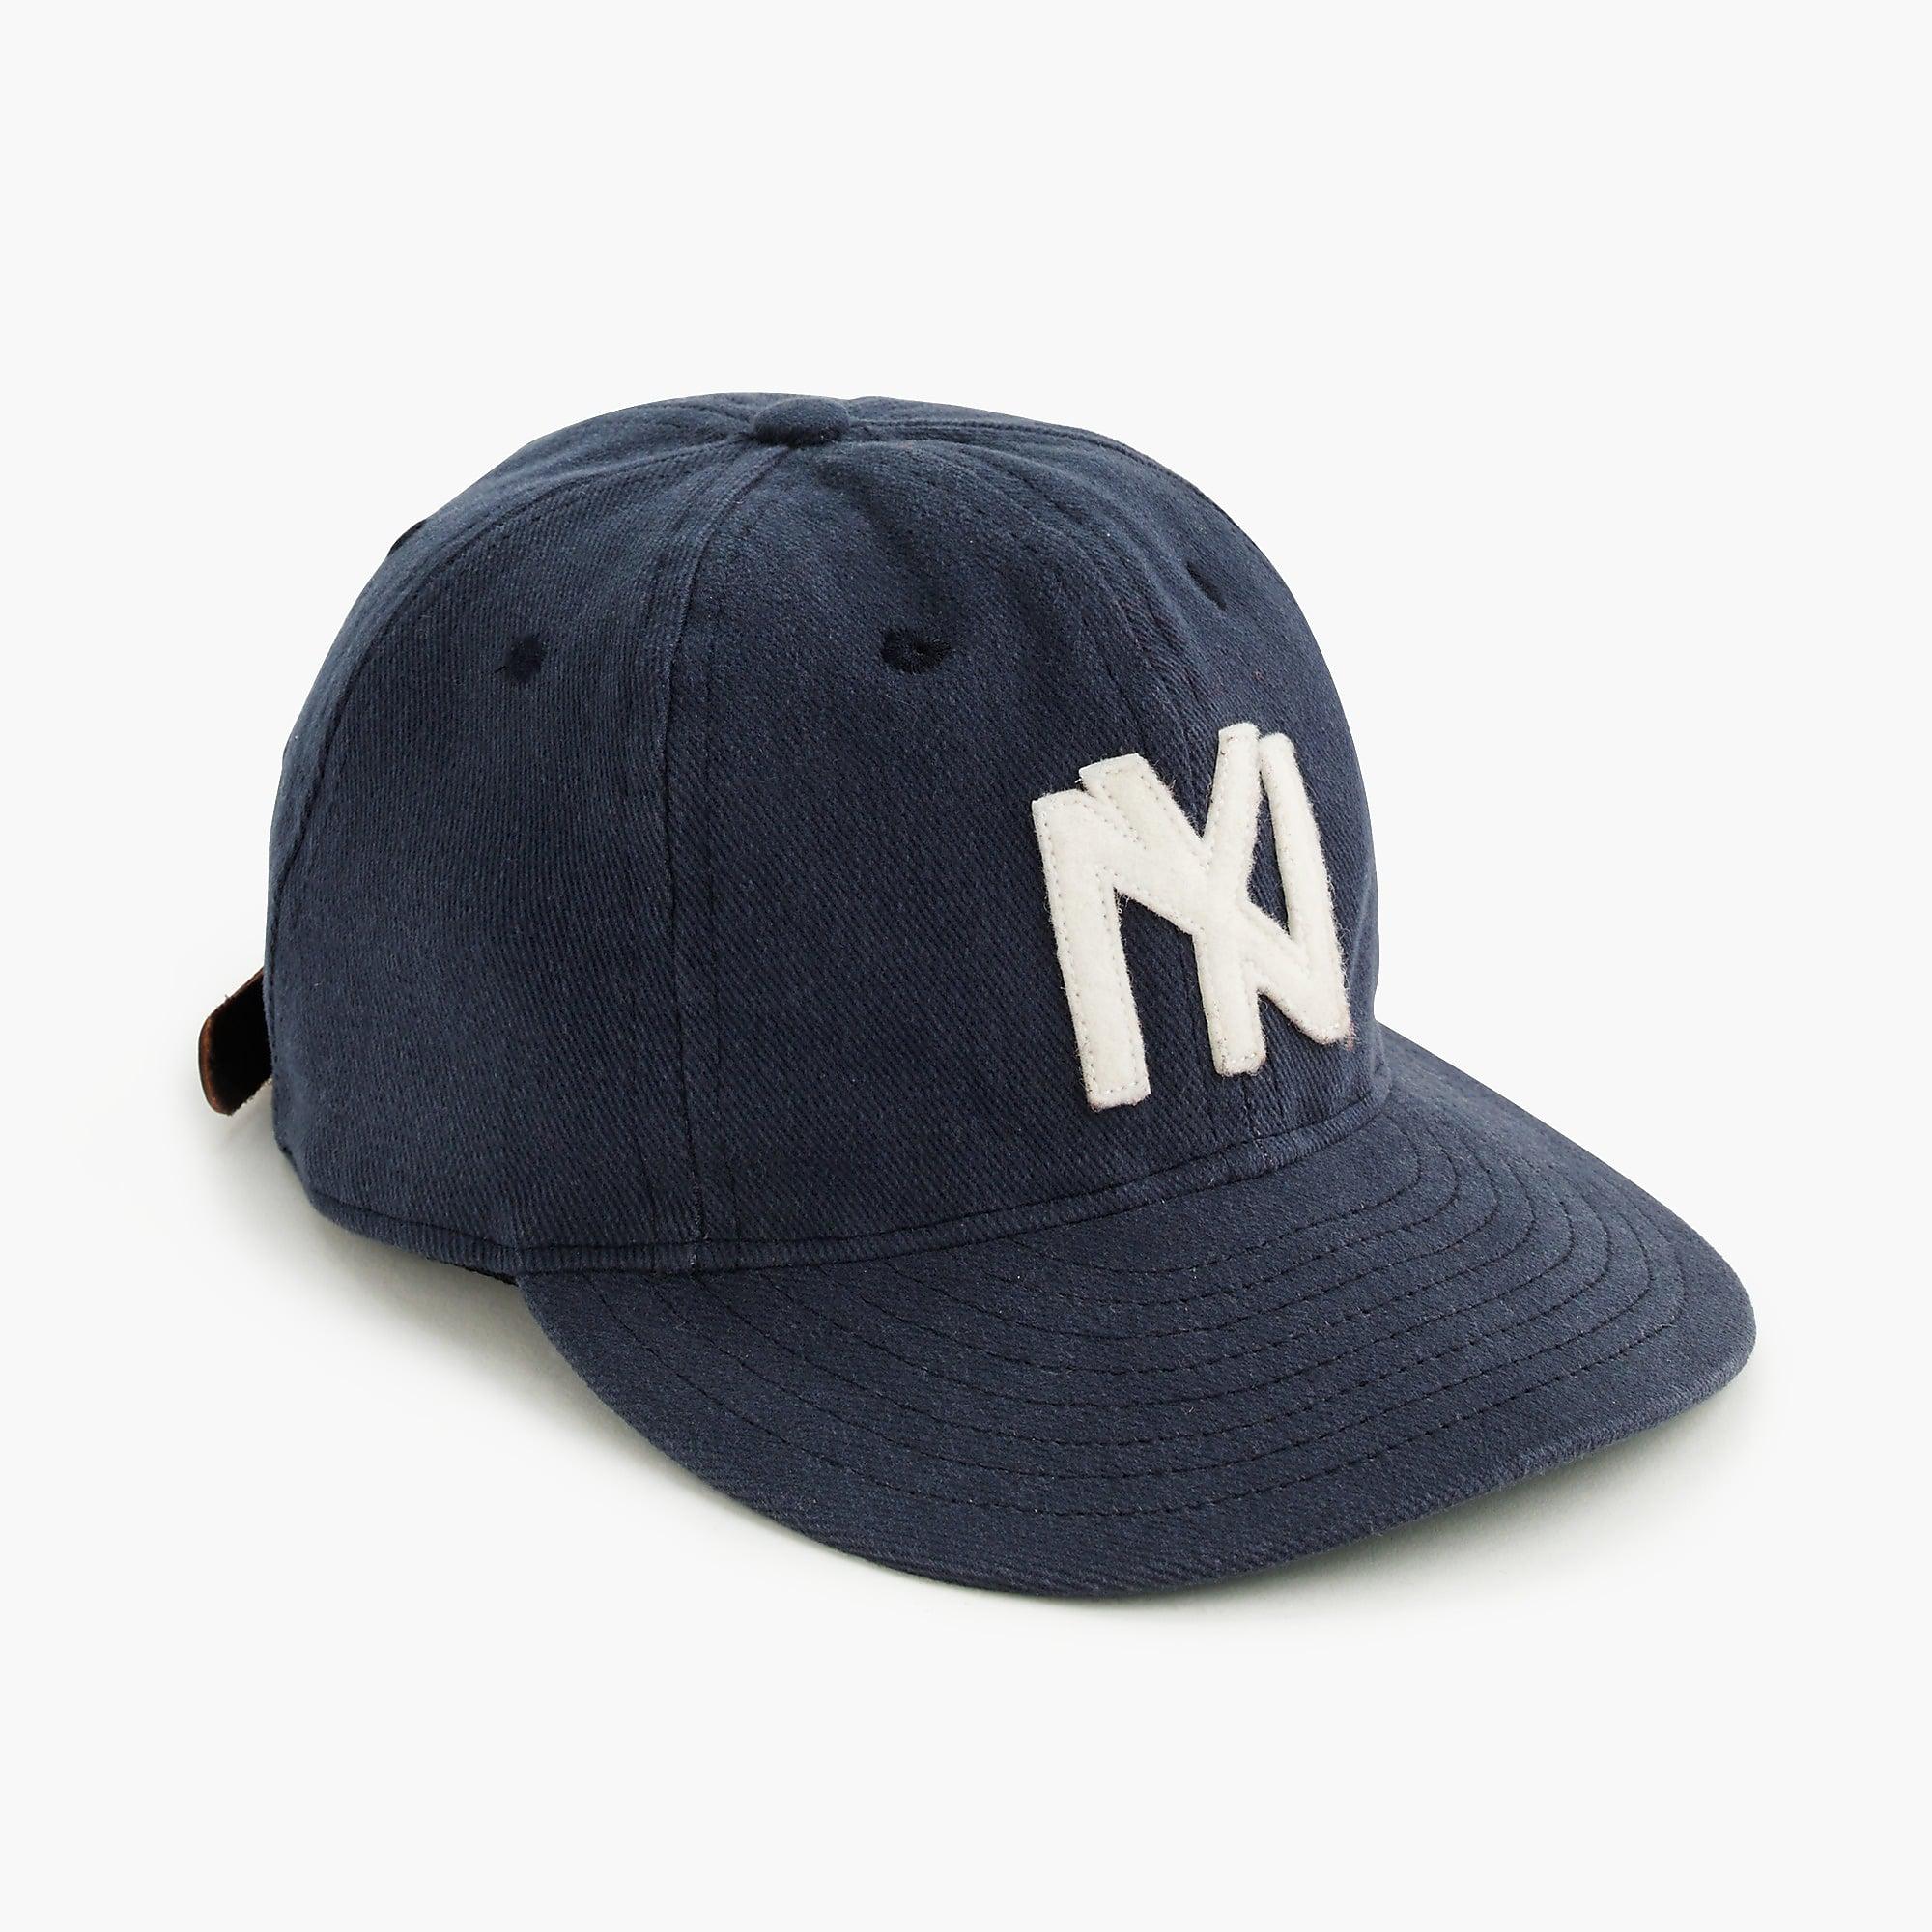 Ebbets Field Flannels Ebbets Field Flannels Baseball Cap in Blue for